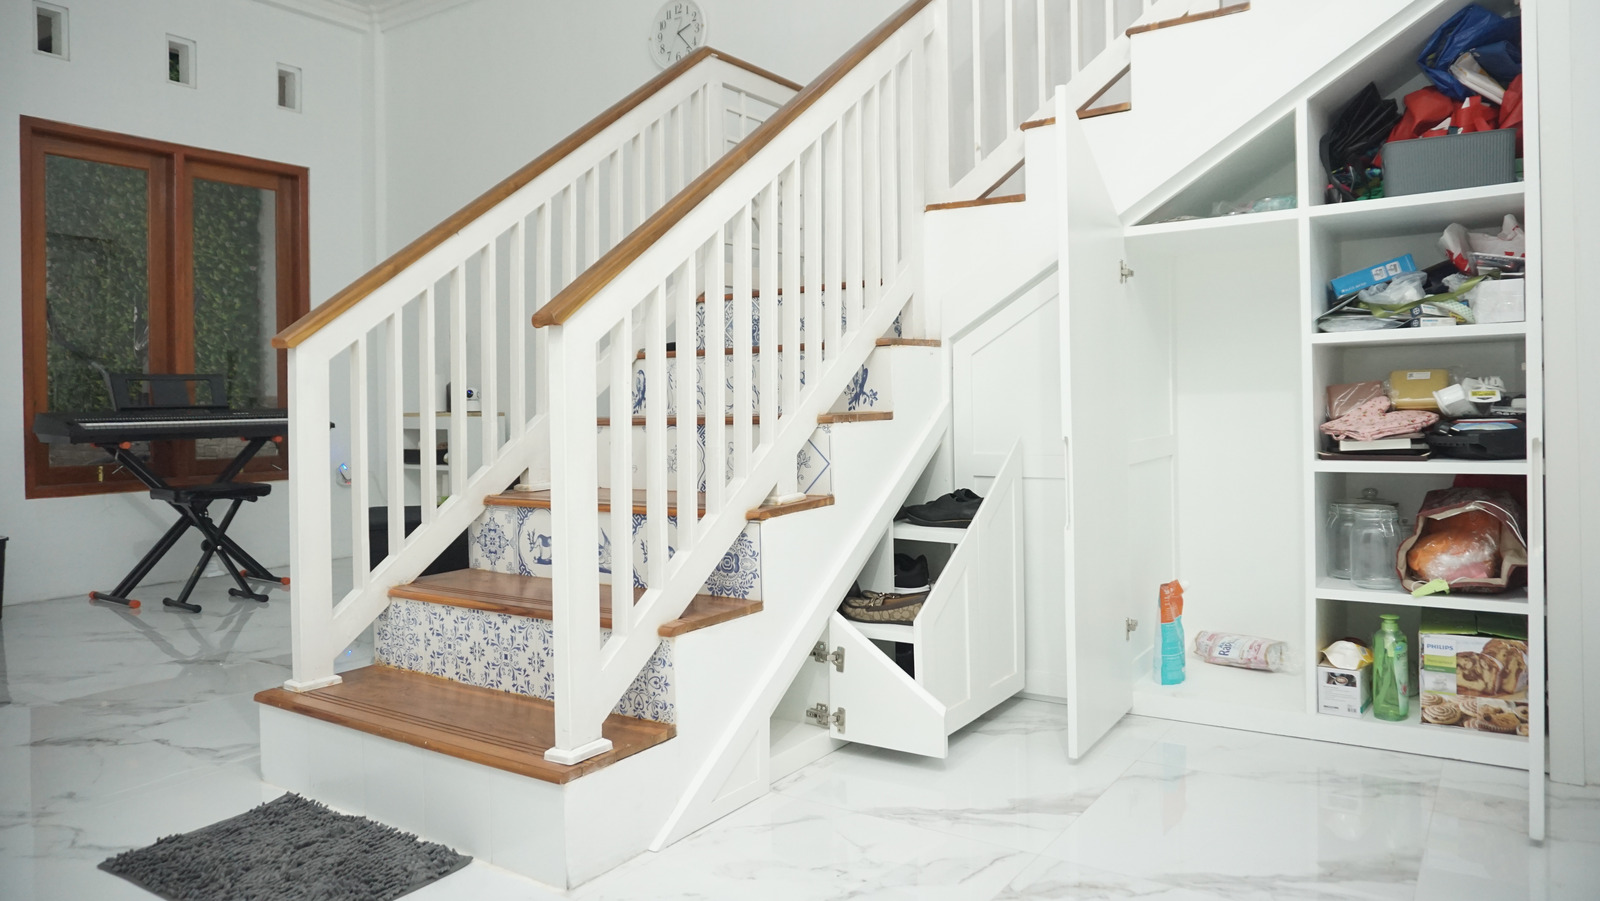 https://www.housedigest.com/img/gallery/try-this-ikea-hack-to-create-beautiful-built-in-storage-under-your-stairs/l-intro-1694083447.jpg